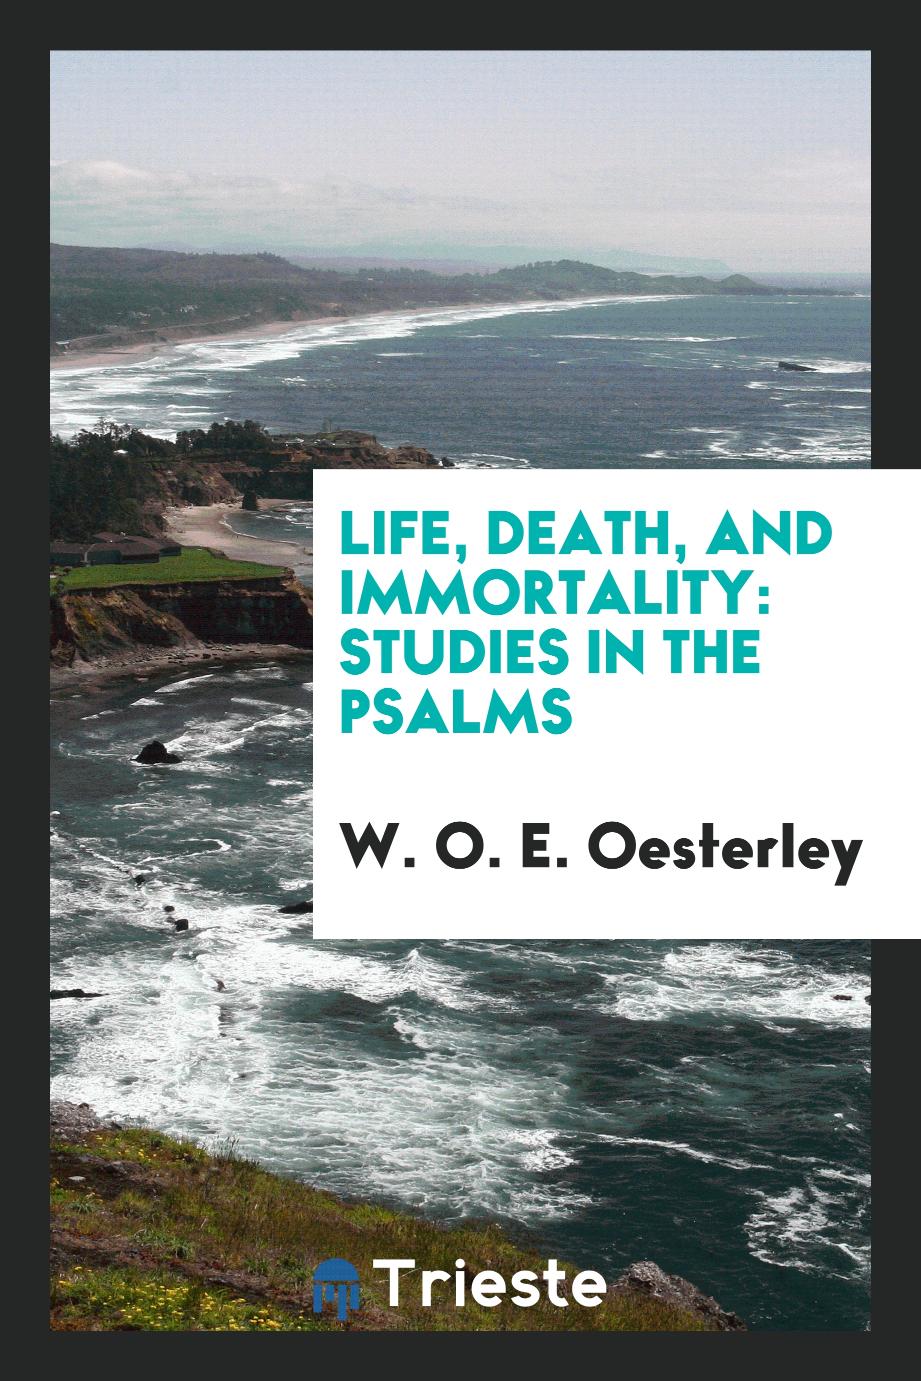 Life, death, and immortality: studies in the Psalms